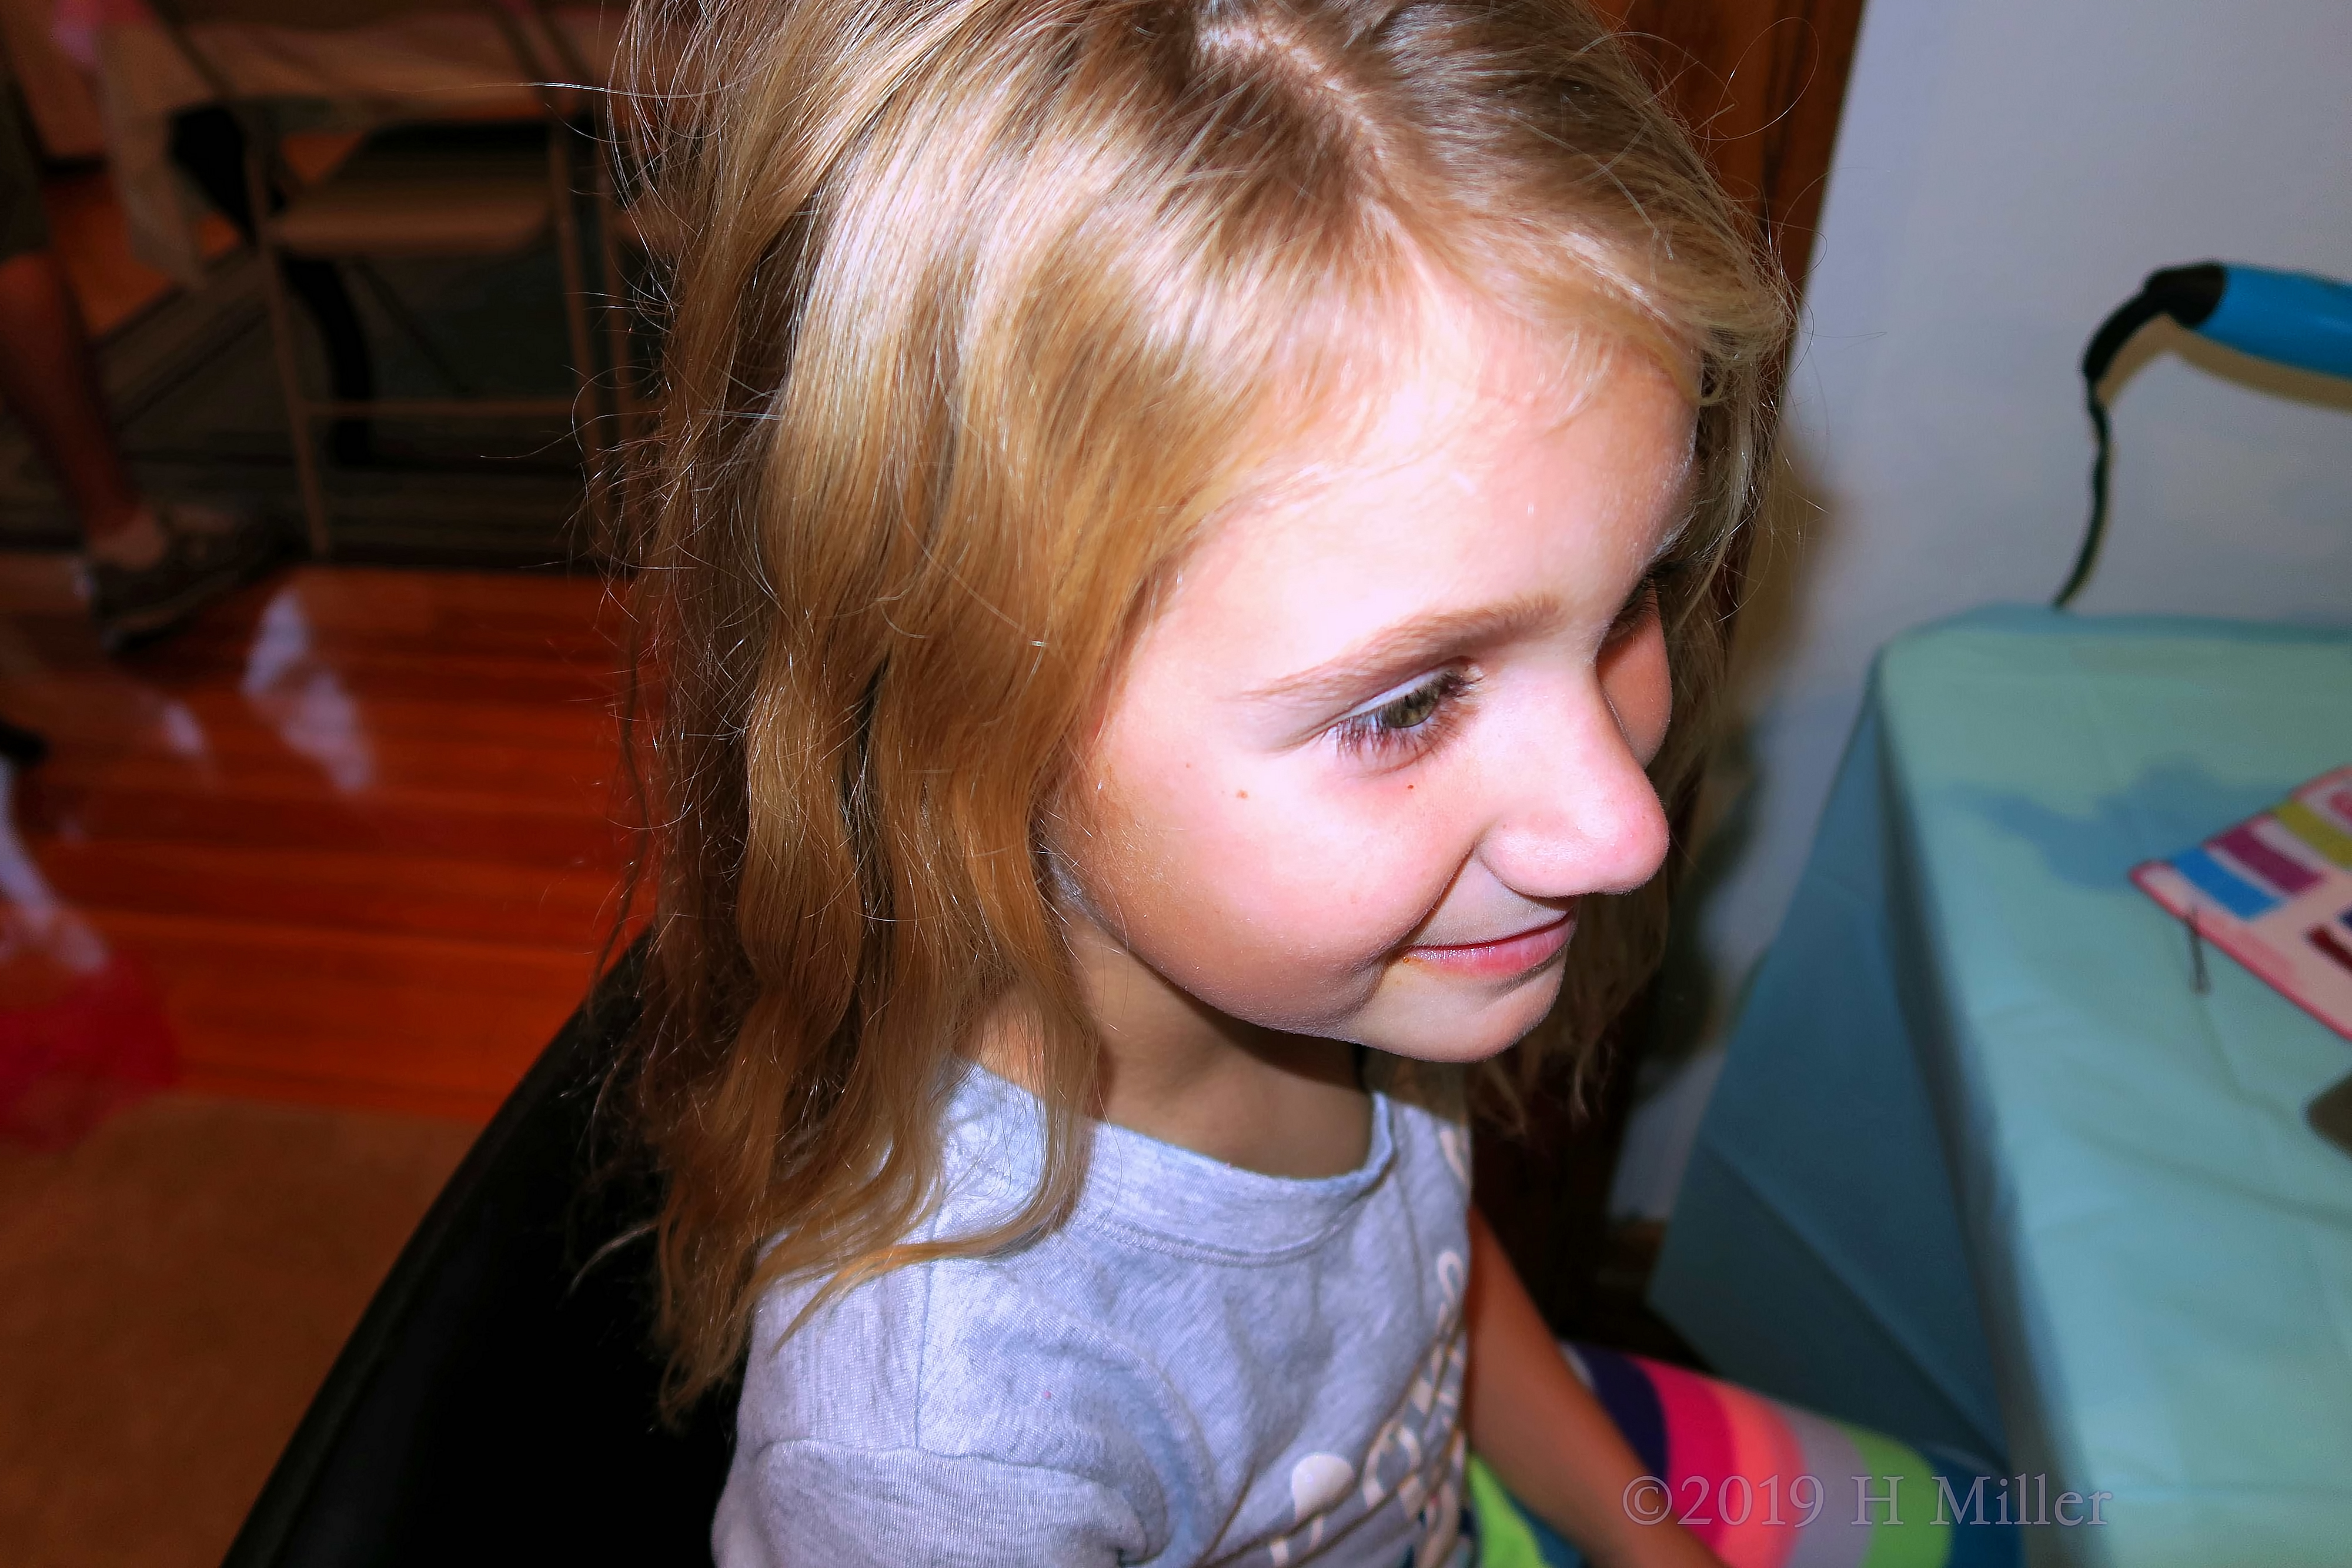 Wavy For Waves! Kids Hairstyle On Party Guest! 4